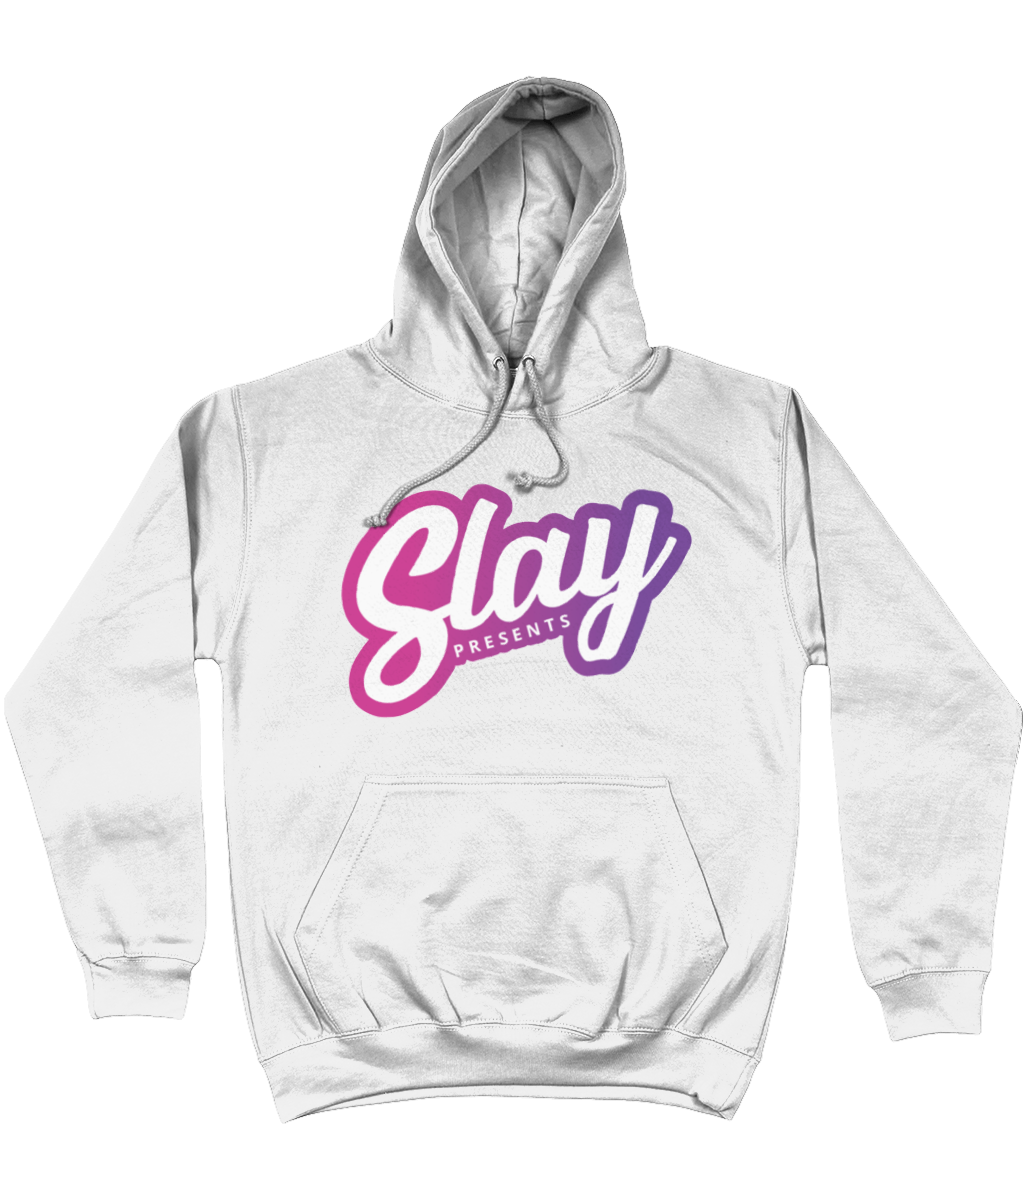 Slay! Presents Hoodie - SNATCHED MERCH